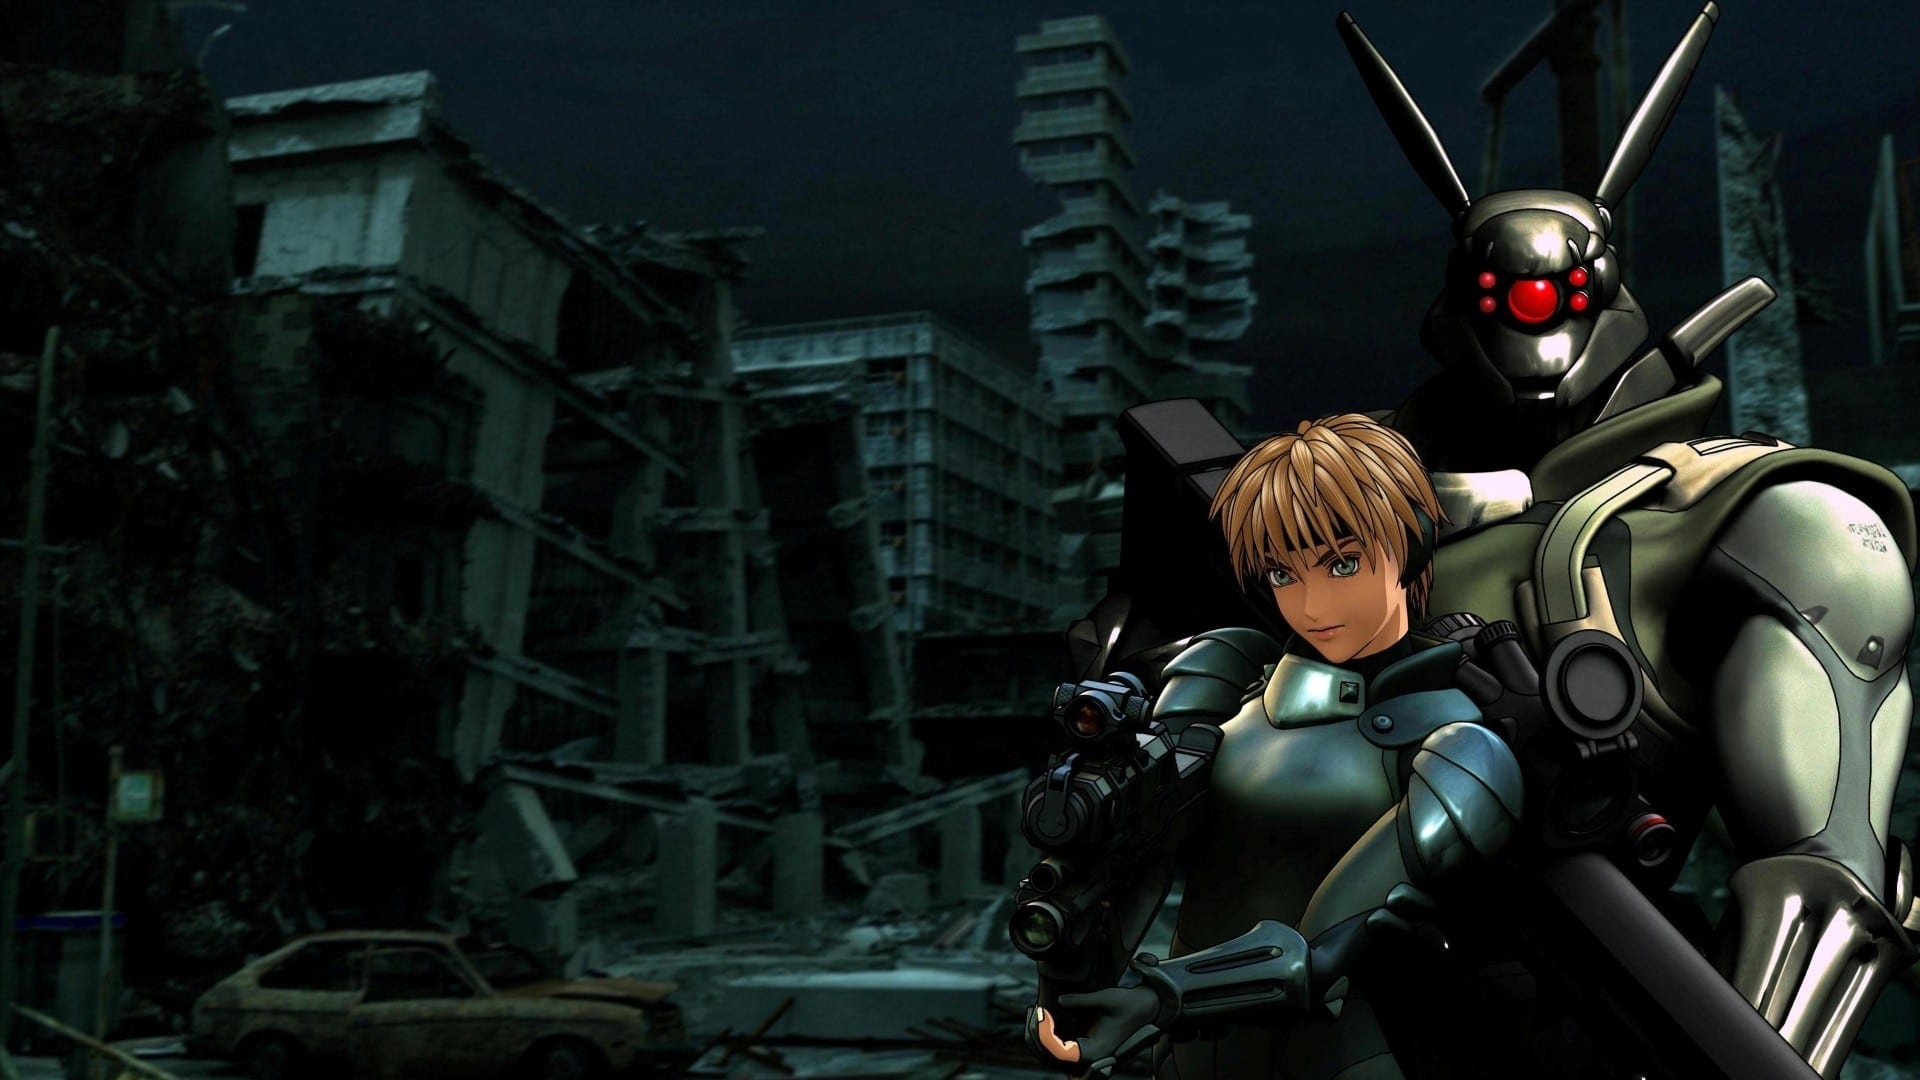 Deunan Knute and her cyborg companion Briareos Hecatonchires in Appleseed (2004)